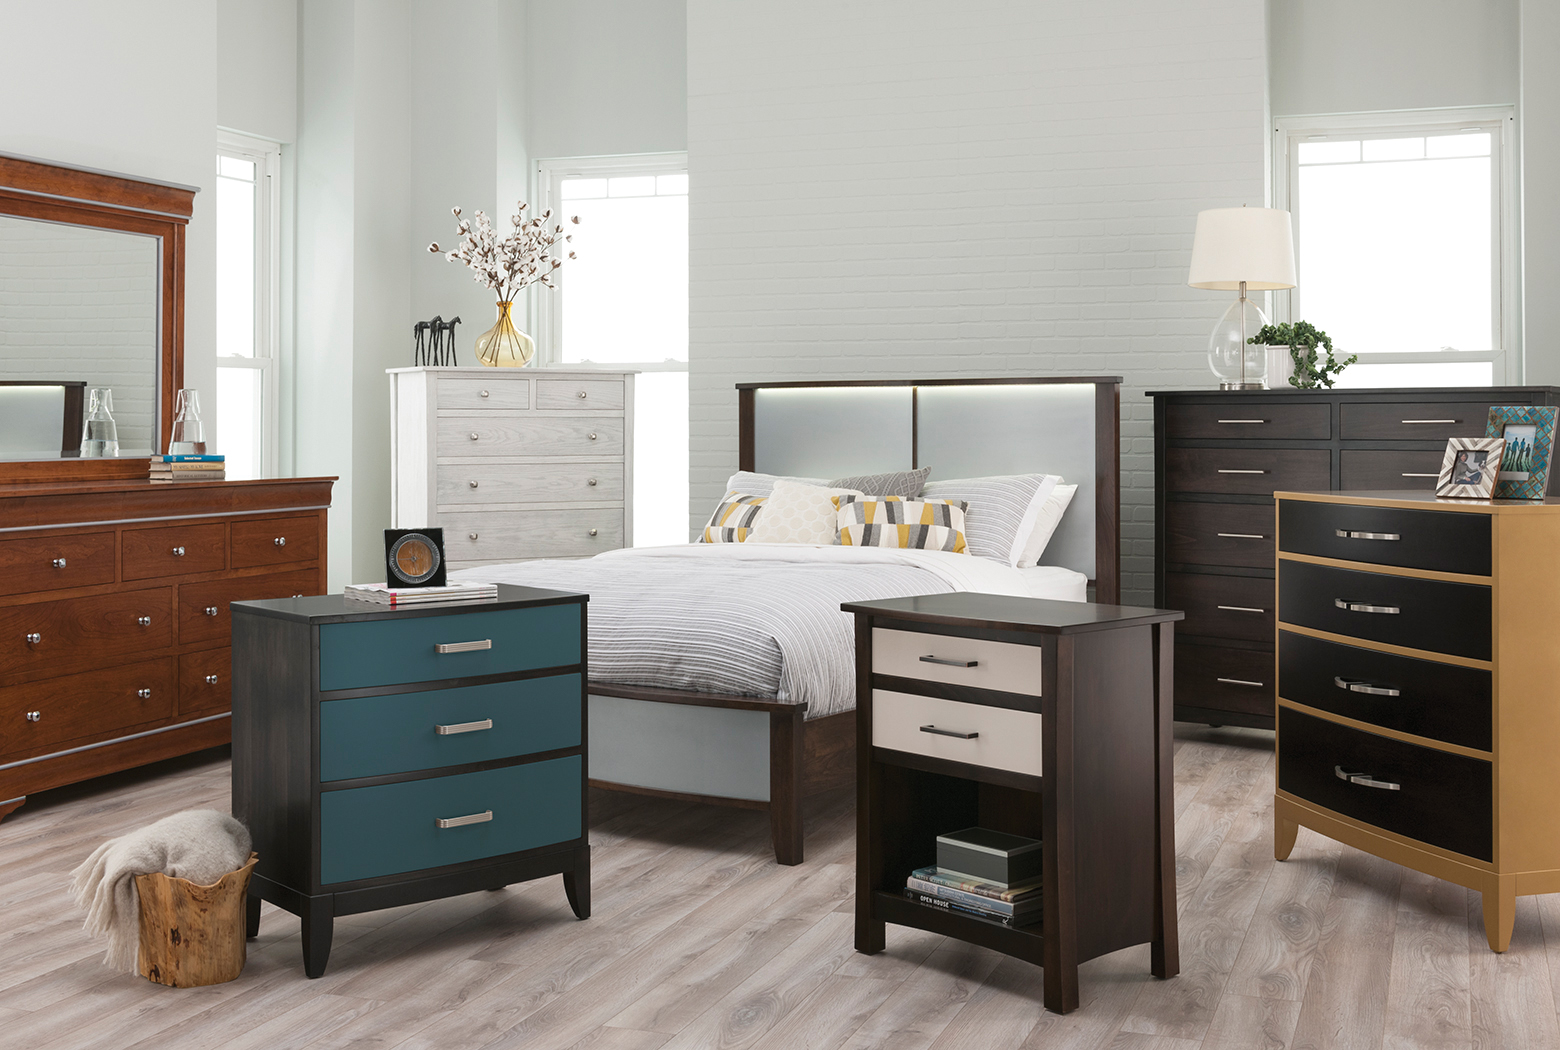 Bedroom furniture in a variety of finishes